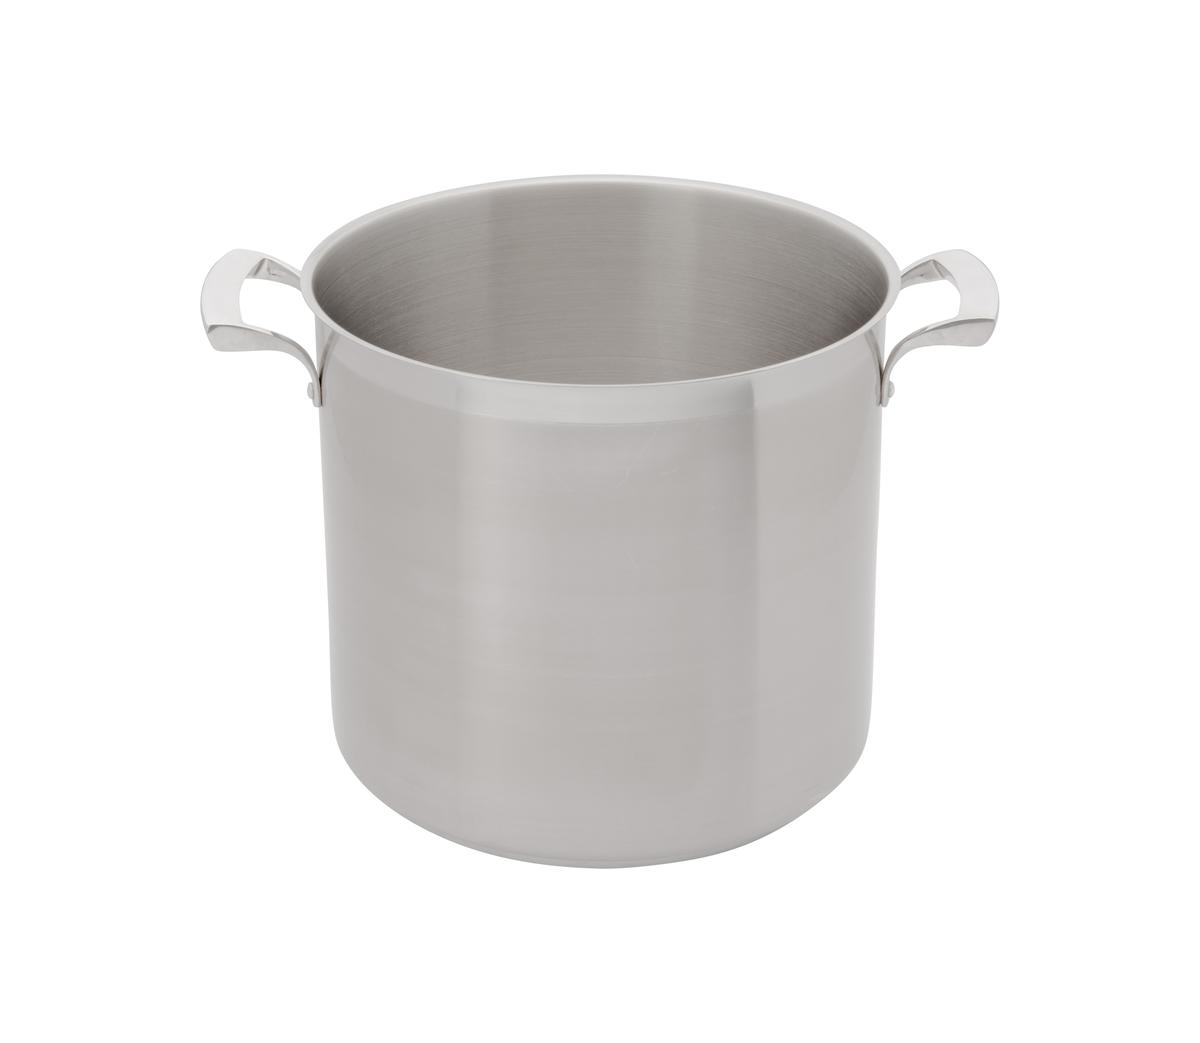 Thermalloy Stainless Steel 11"/28cm 16QT/16L Deep Stock Pot